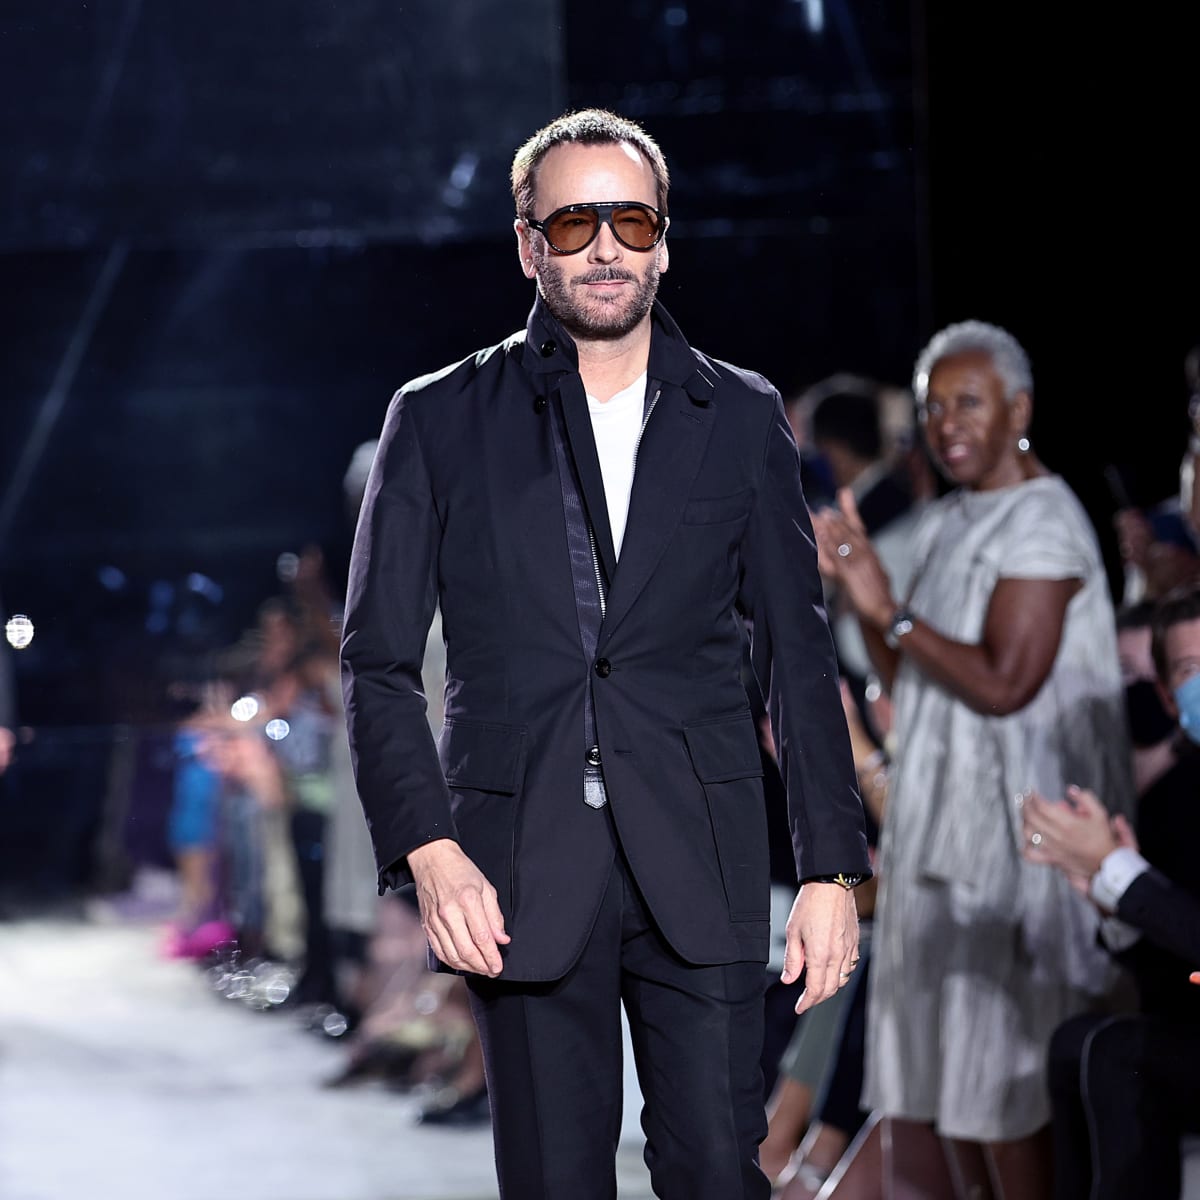 Tom Ford Reissues His Favorite Looks in Surprise 'Final Collection 